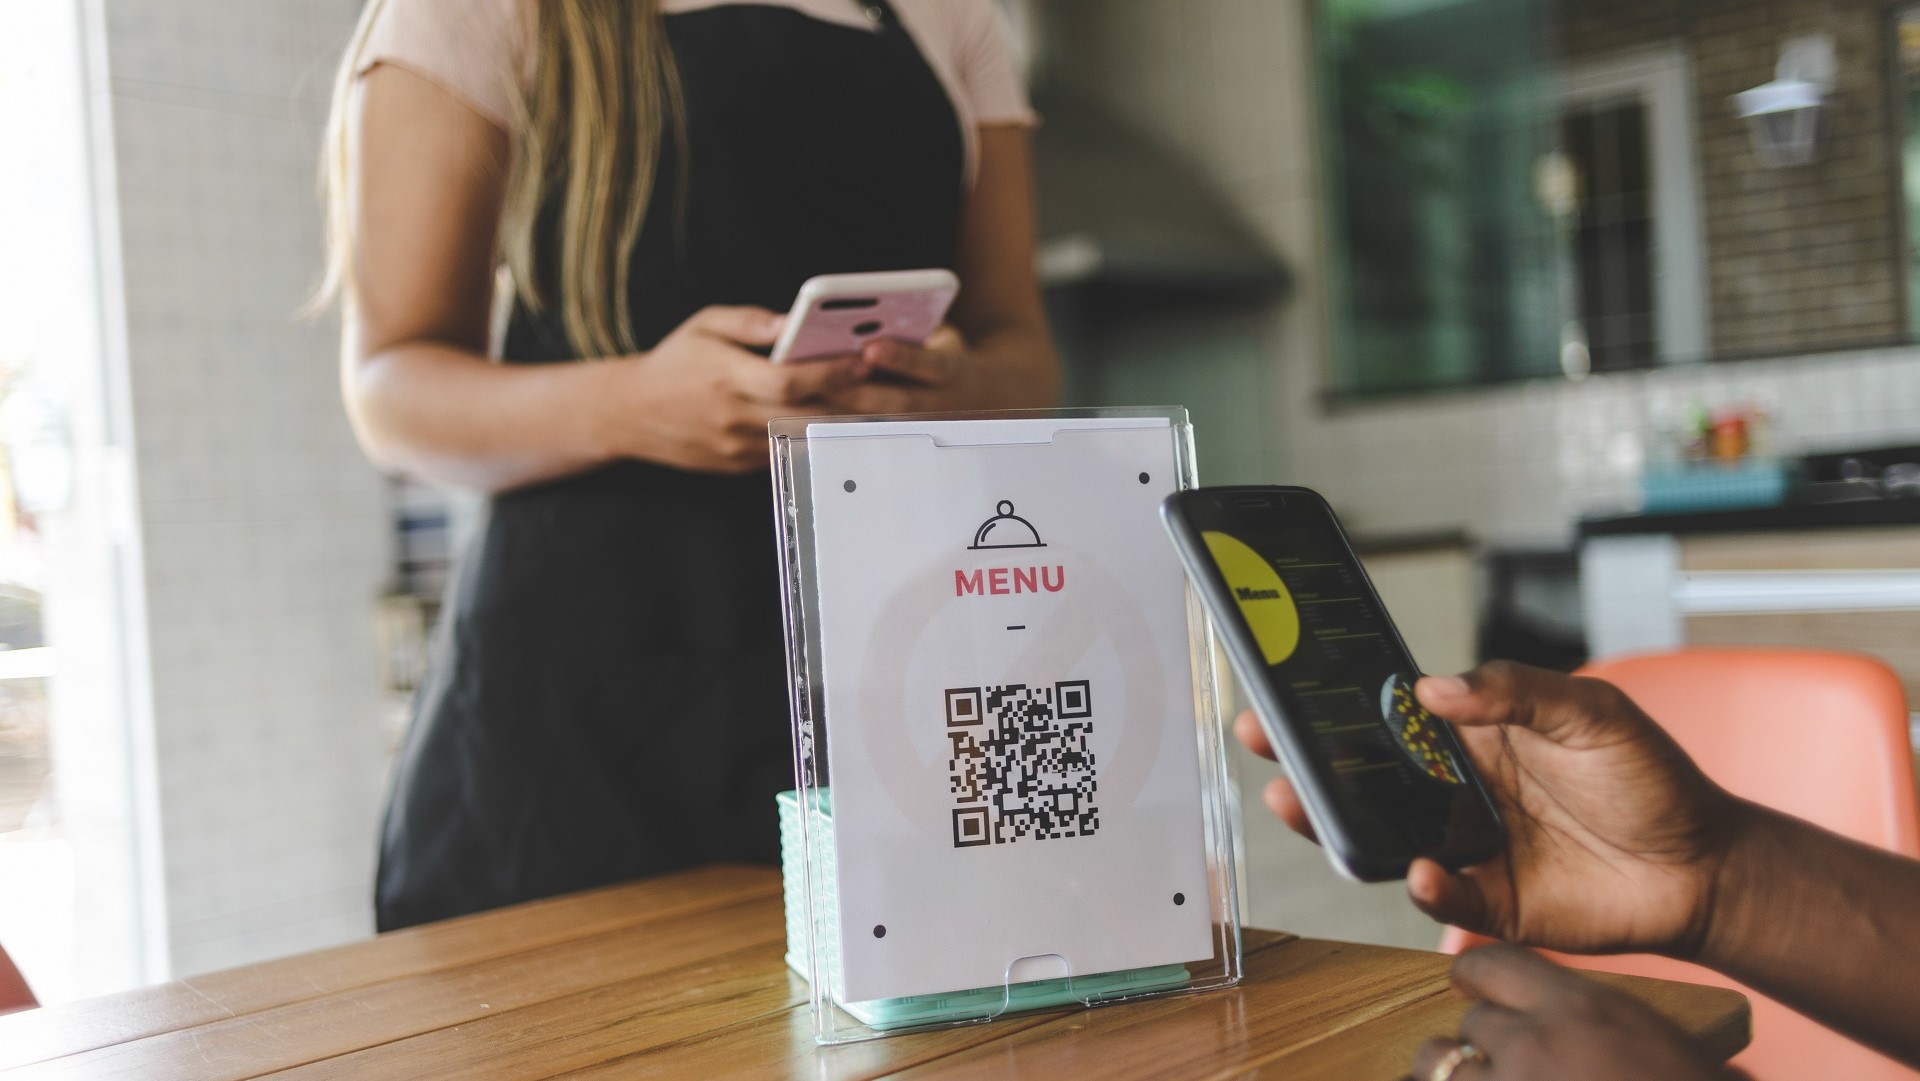 qr code scams are rising – 9 ways to not get burned